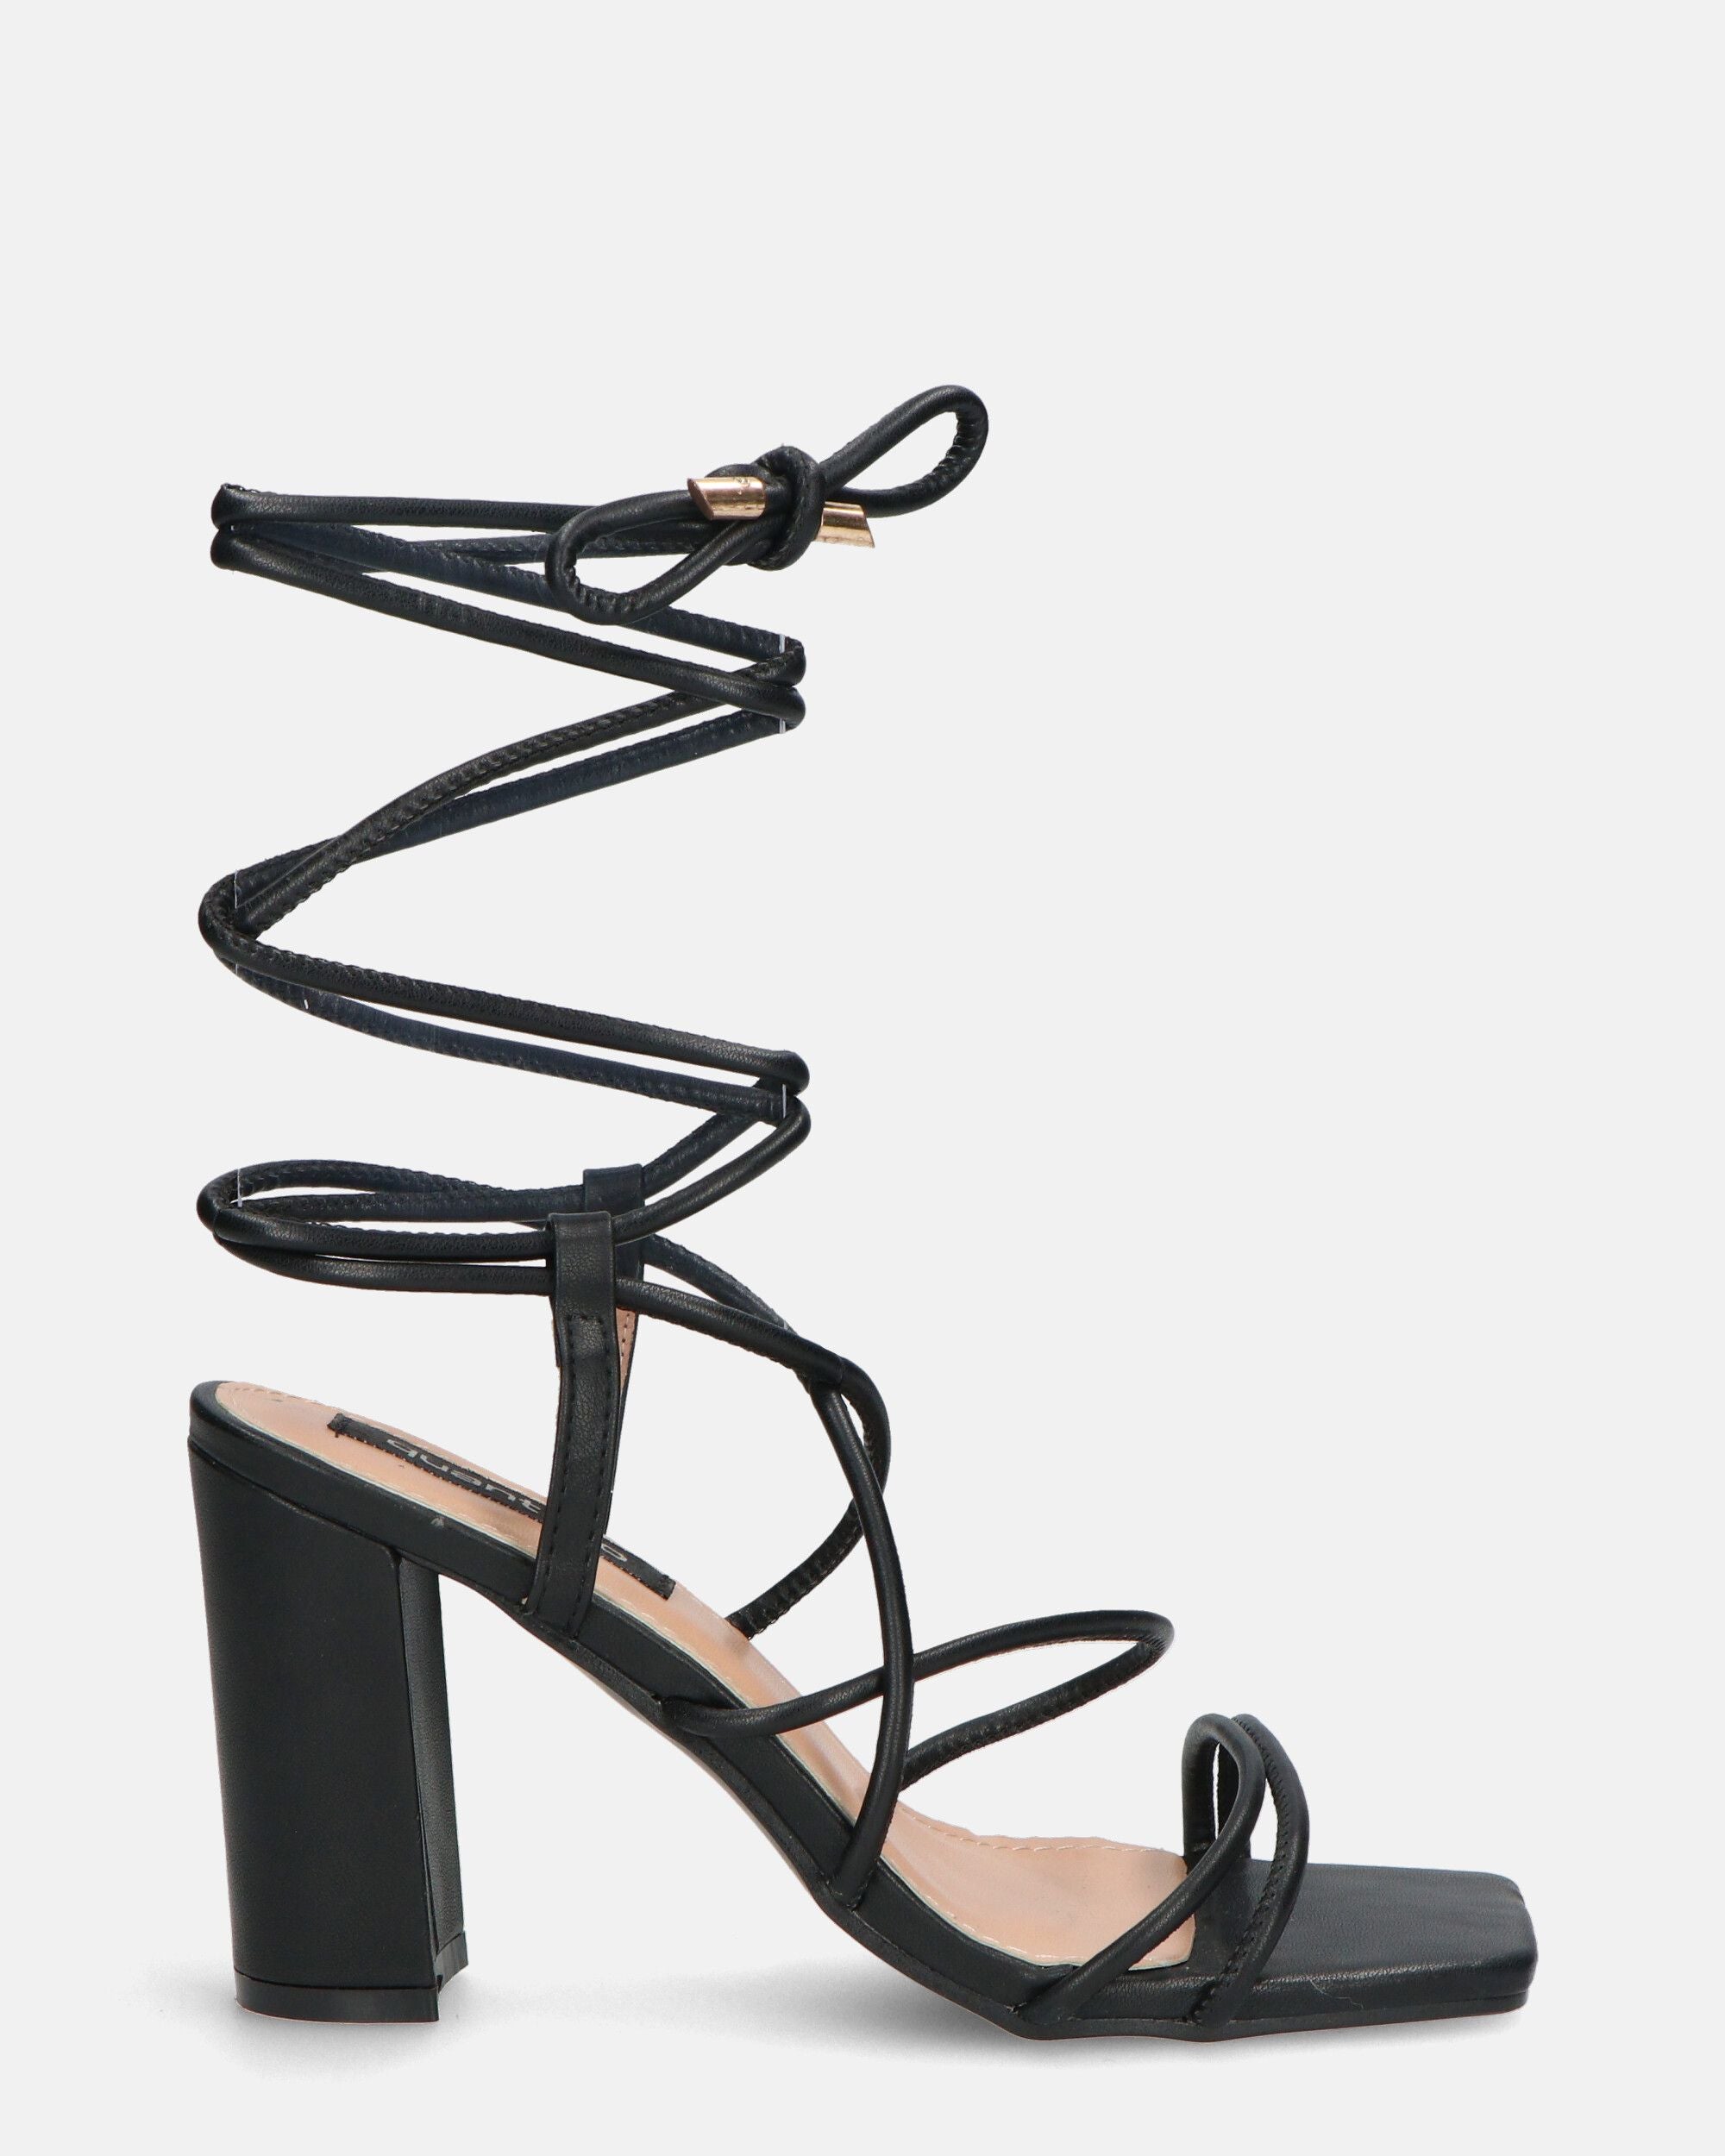 MARISOL - black heeled sandals with laces